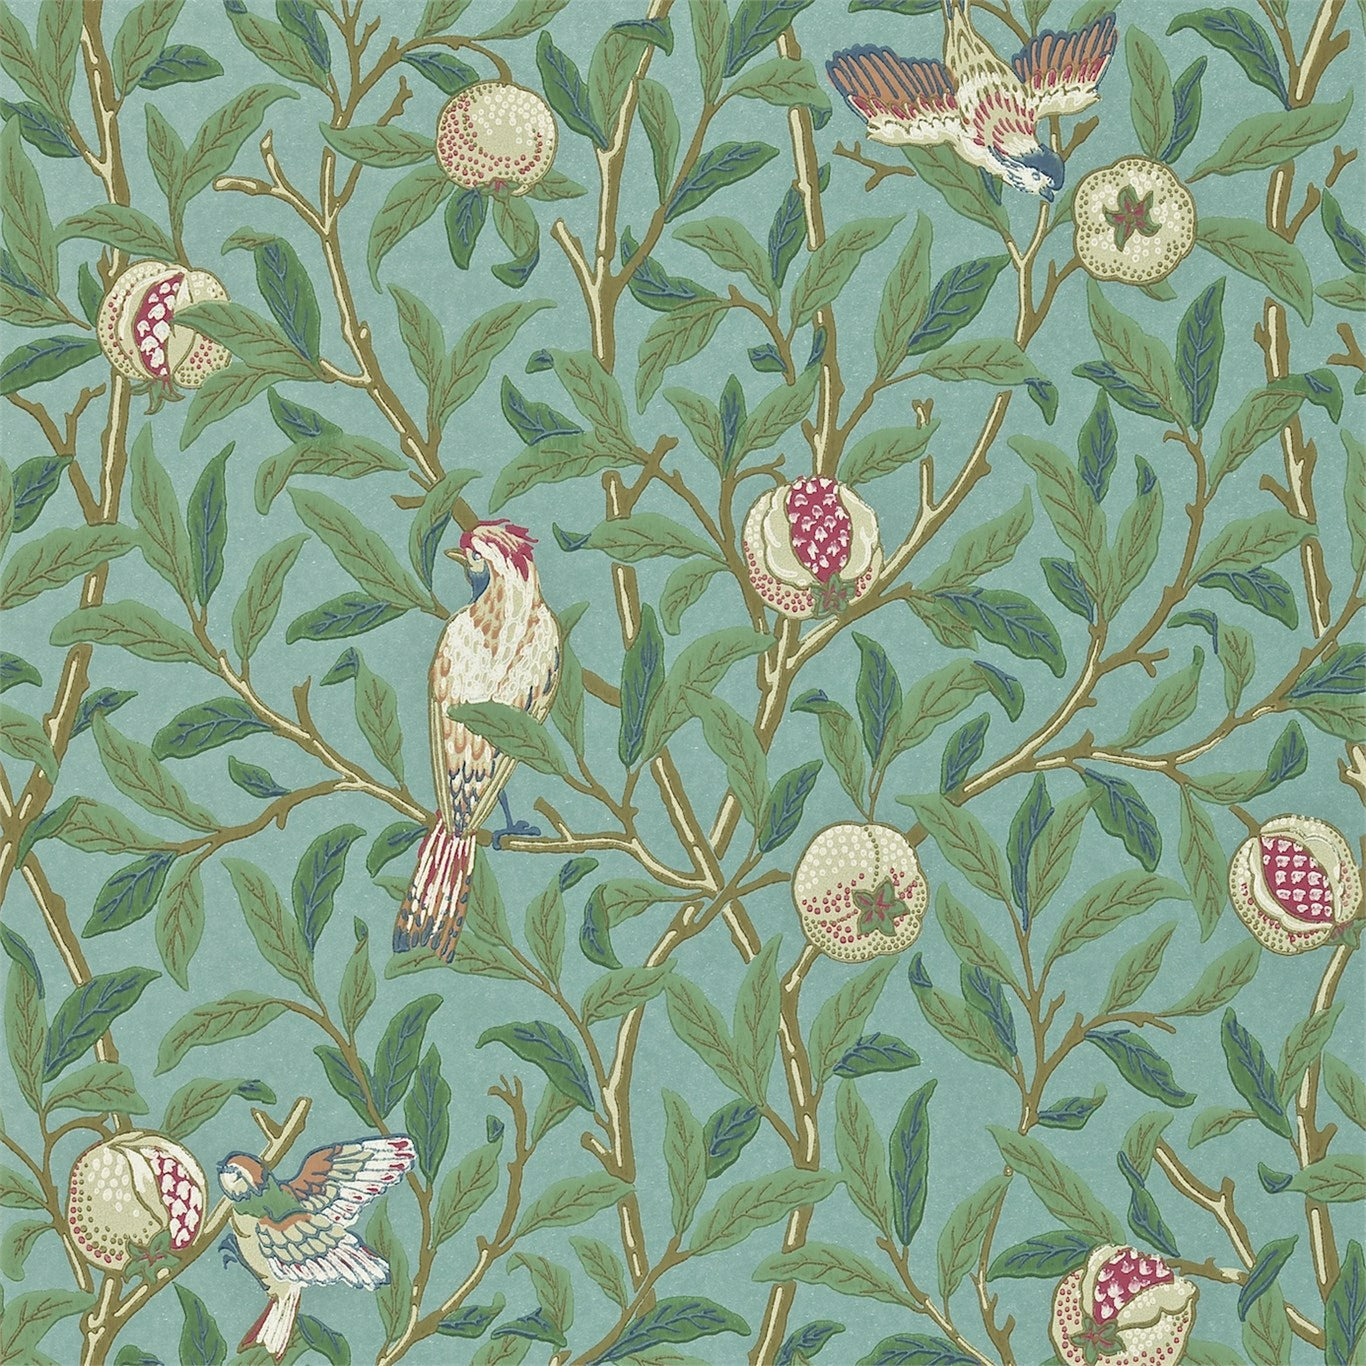 Bird & Pomegranate Turquoise/Coral Wallpaper DARW212538 by Morris & Co